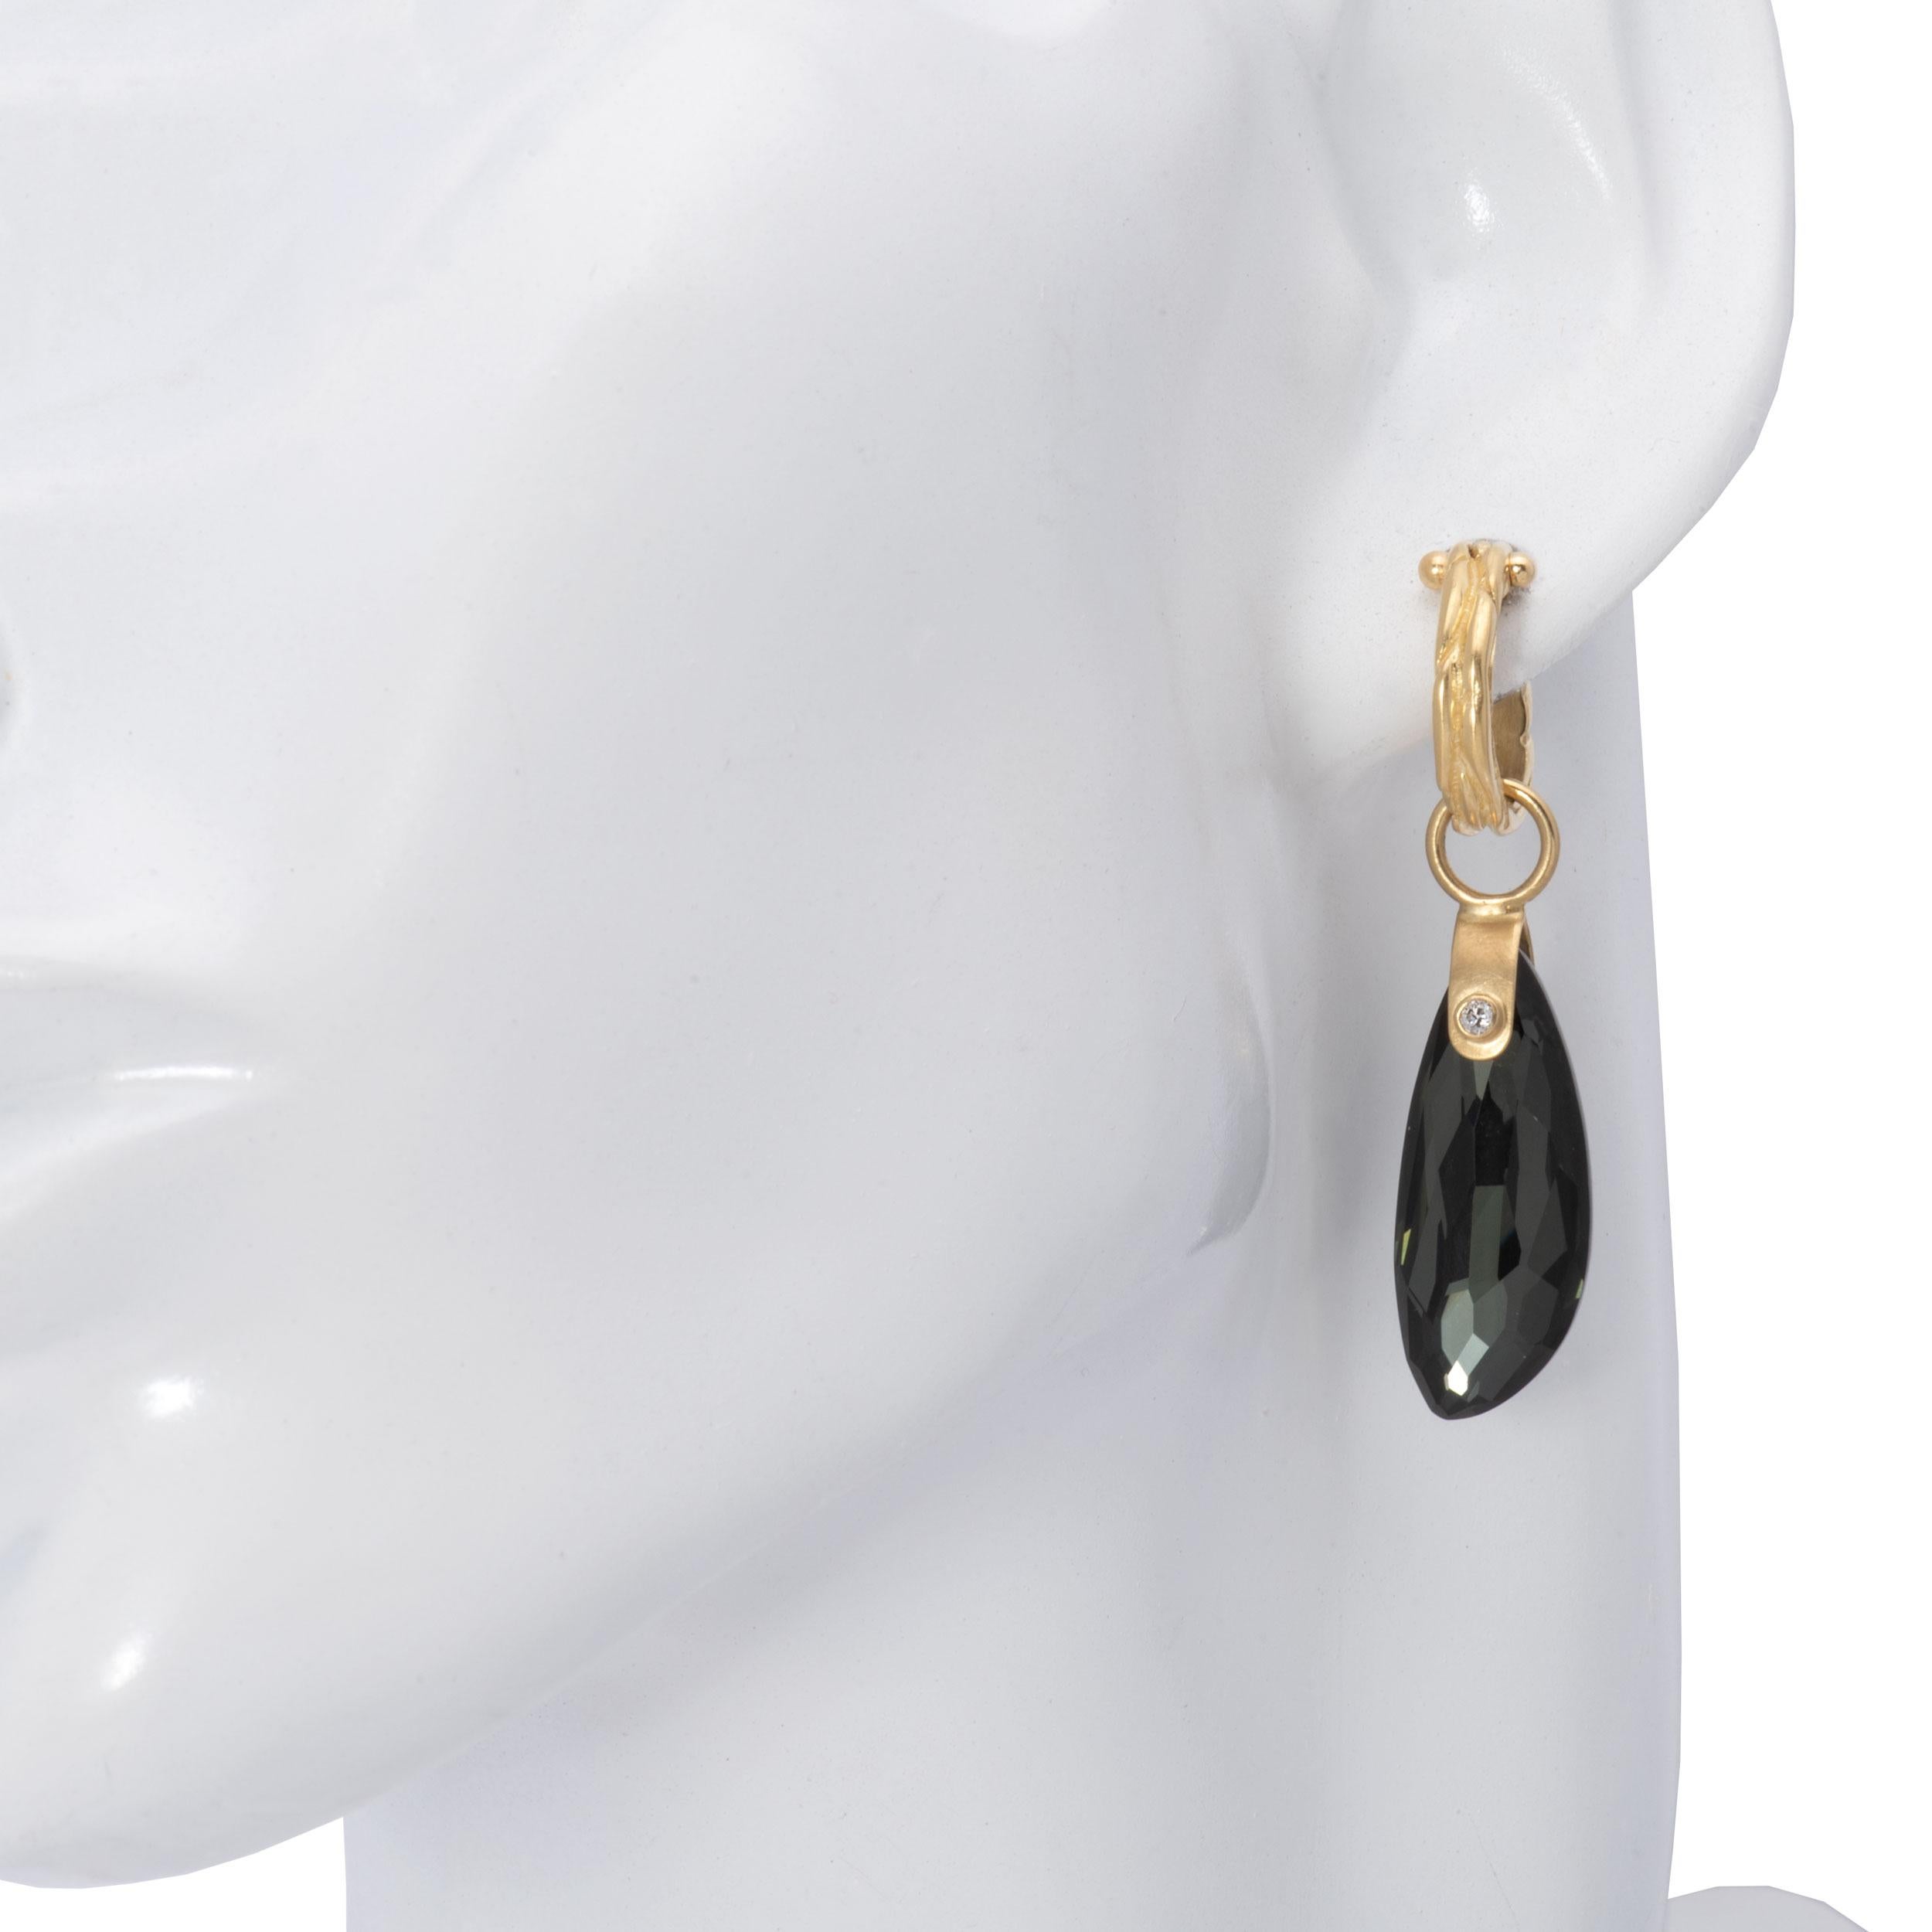 Hematite and Lemon Quartz Seed Pod Drop Earrings in 18 Karat Gold In New Condition For Sale In Santa Fe, NM